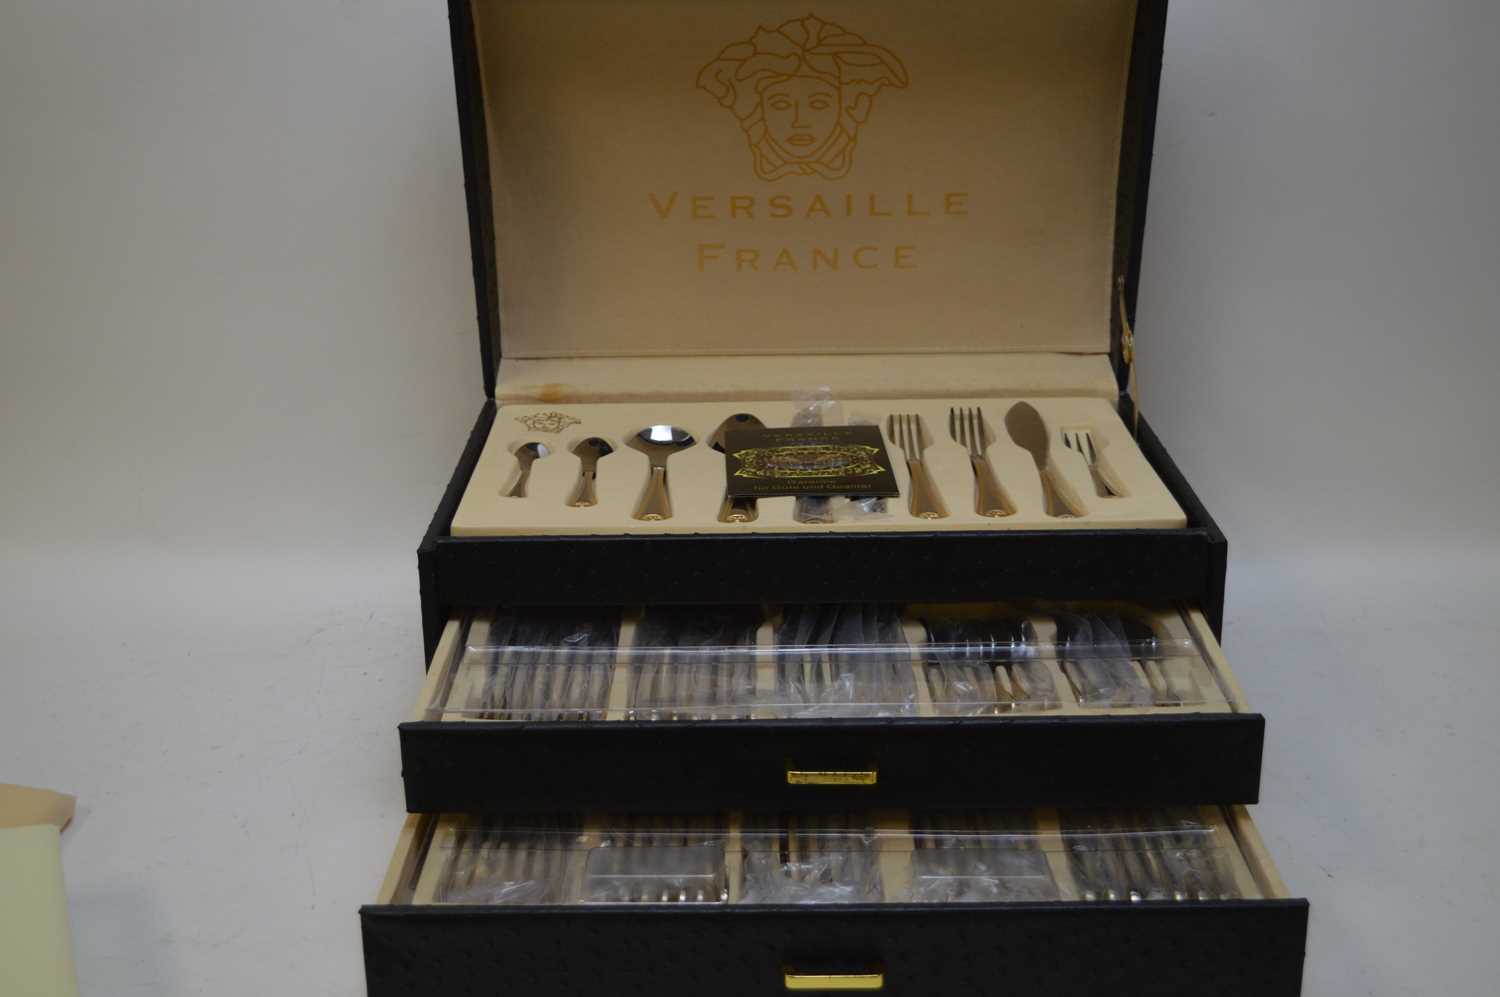 Lot 350 - Versaille france stainless steel and gold plated cutlery set.